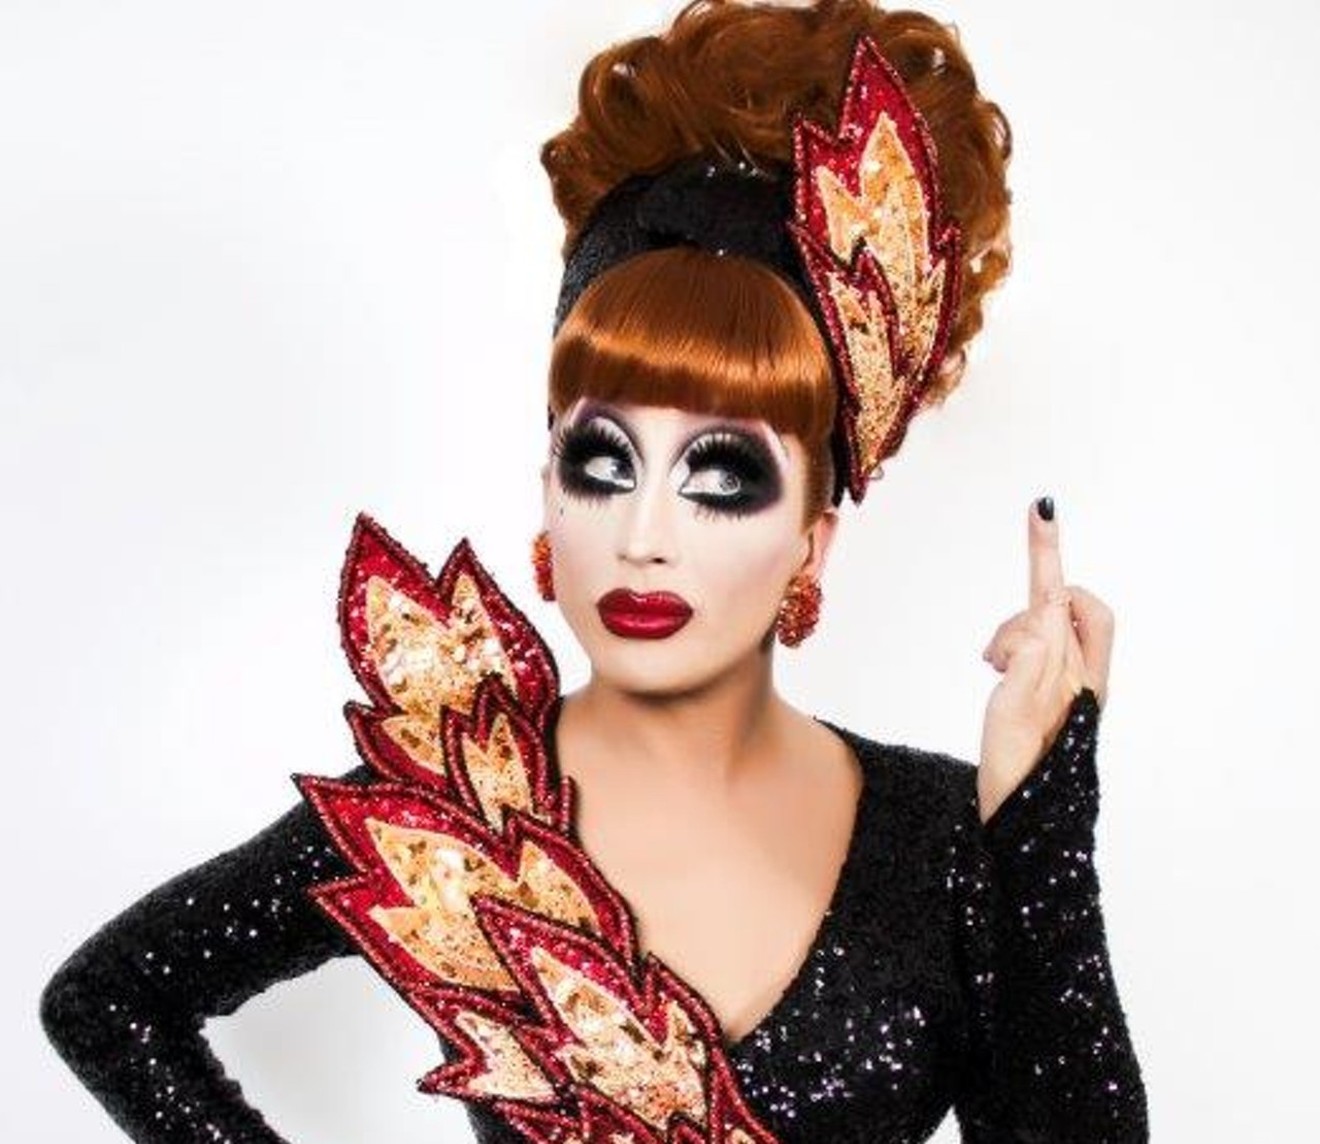 Bianca Del Rio is just one of the Drag Race queens coming to Phoenix this week.